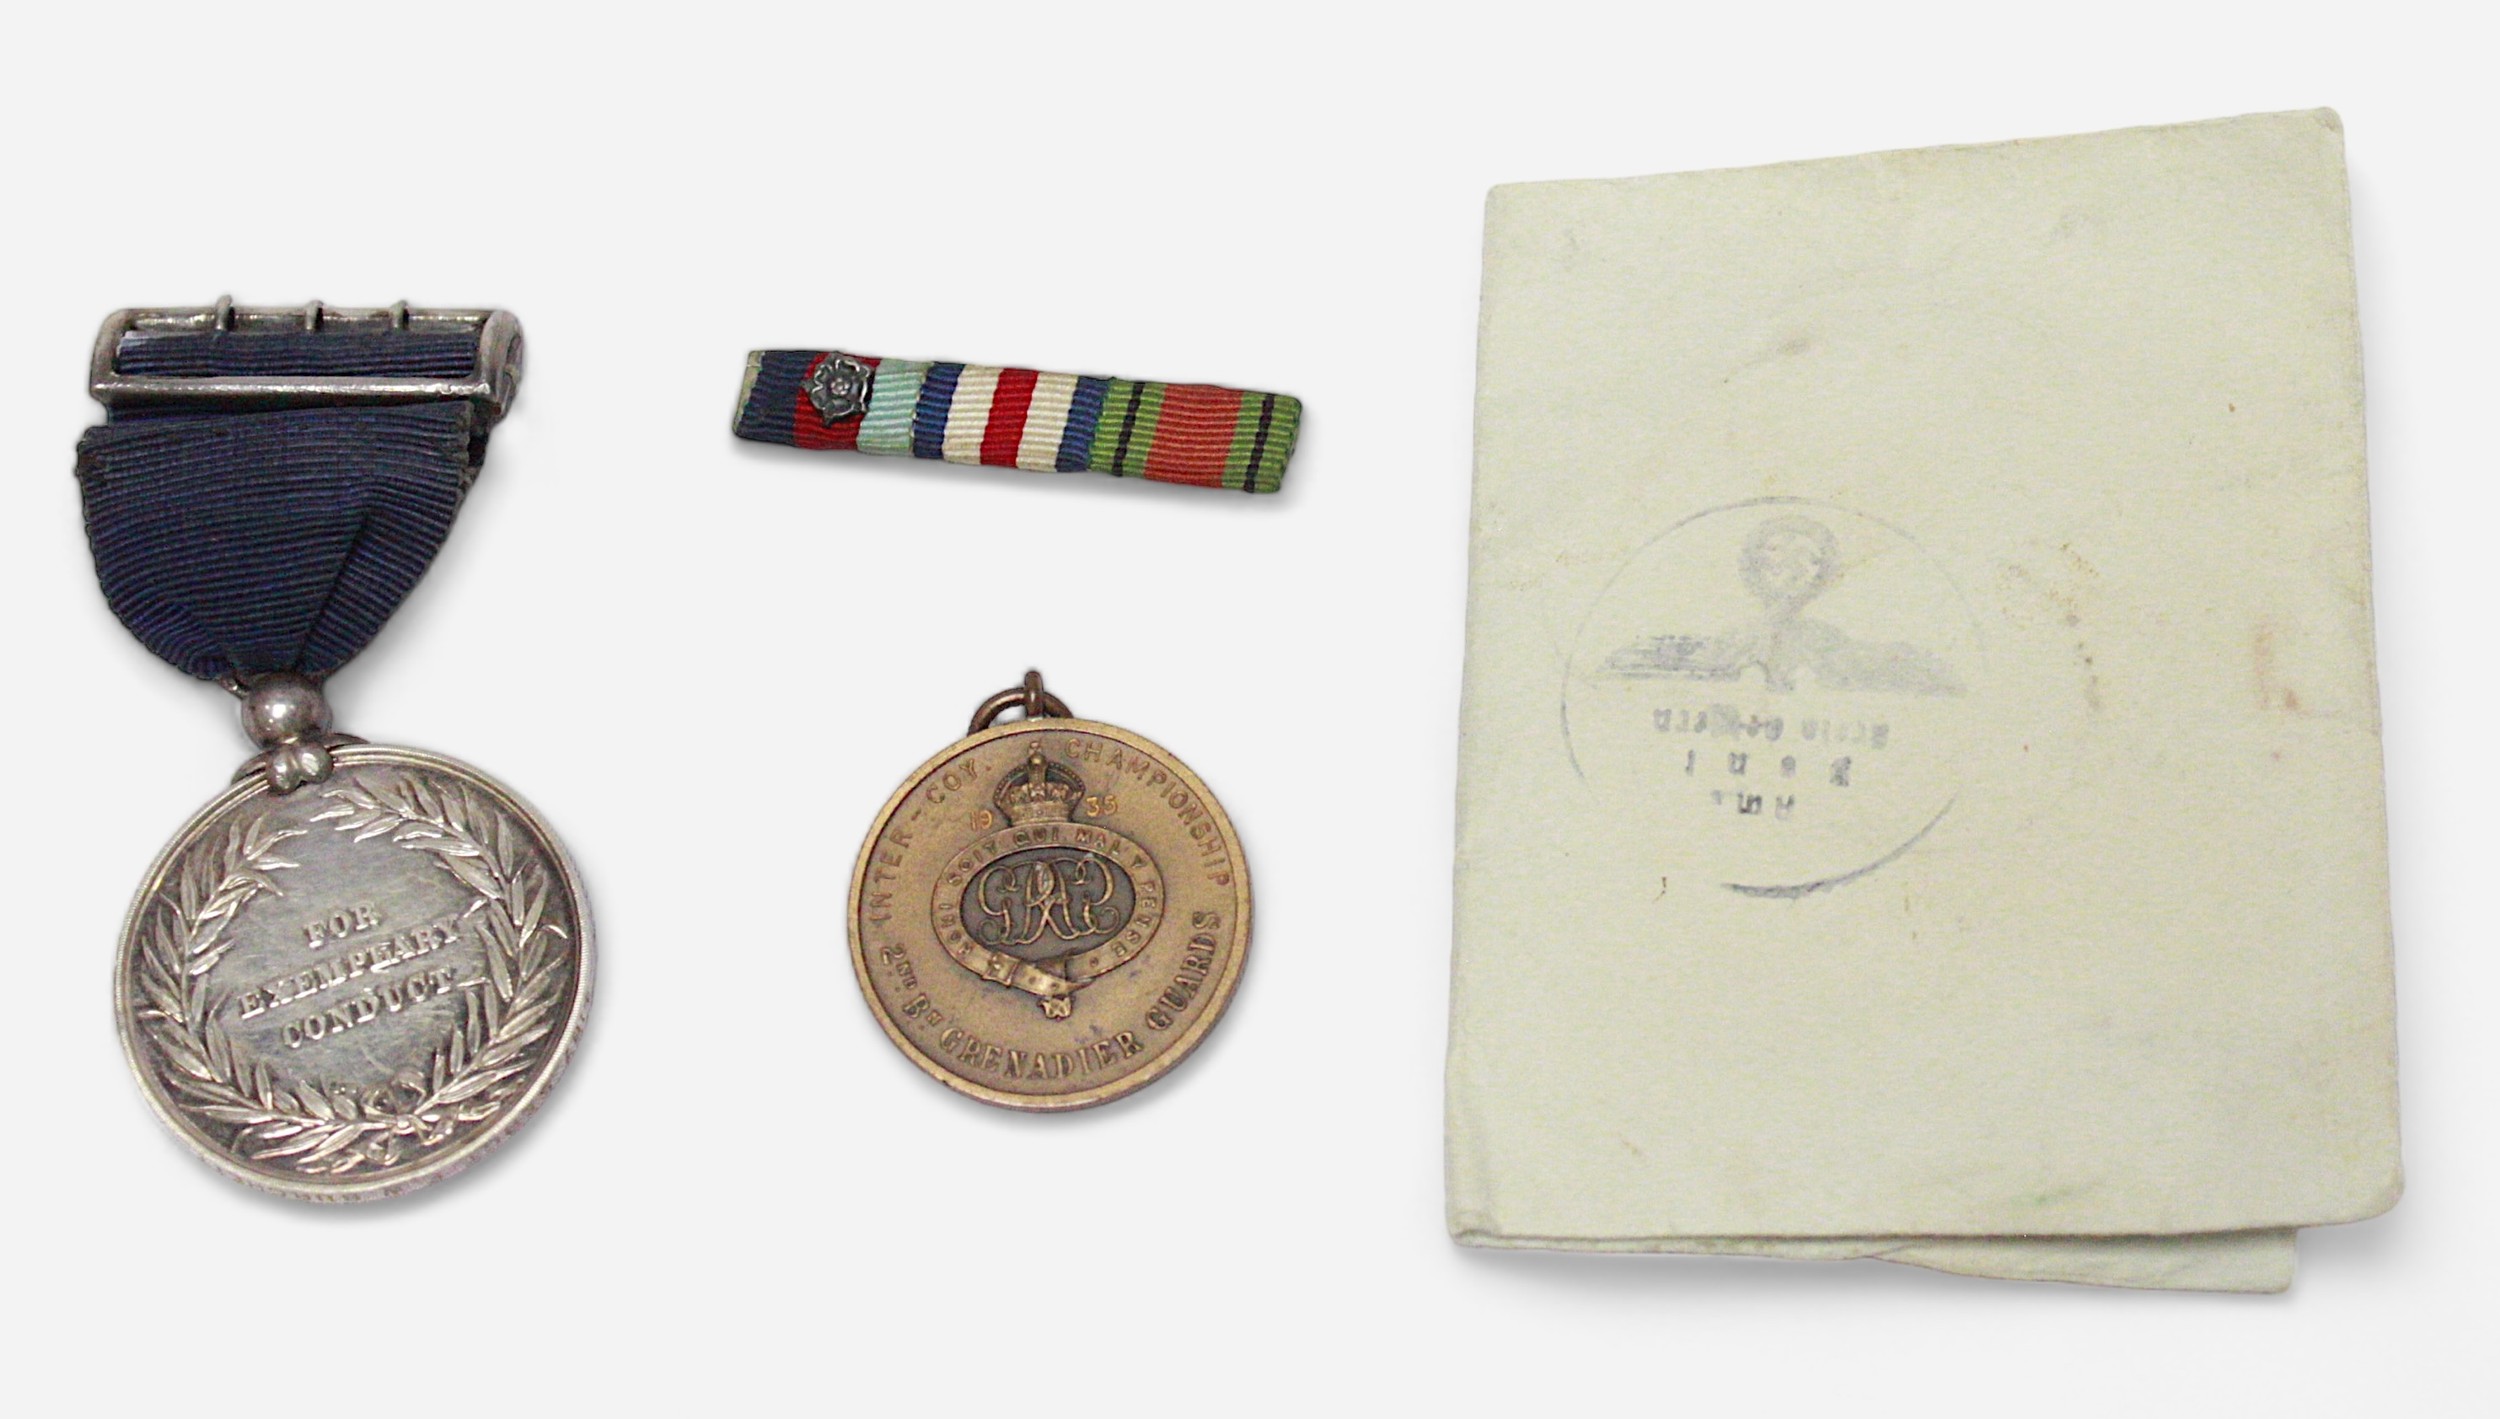 The Gordon Boys Home silver medal For Exemplary Conduct, awarded to ‘4187. Sergt. F.W. Burchett.’, - Image 2 of 3